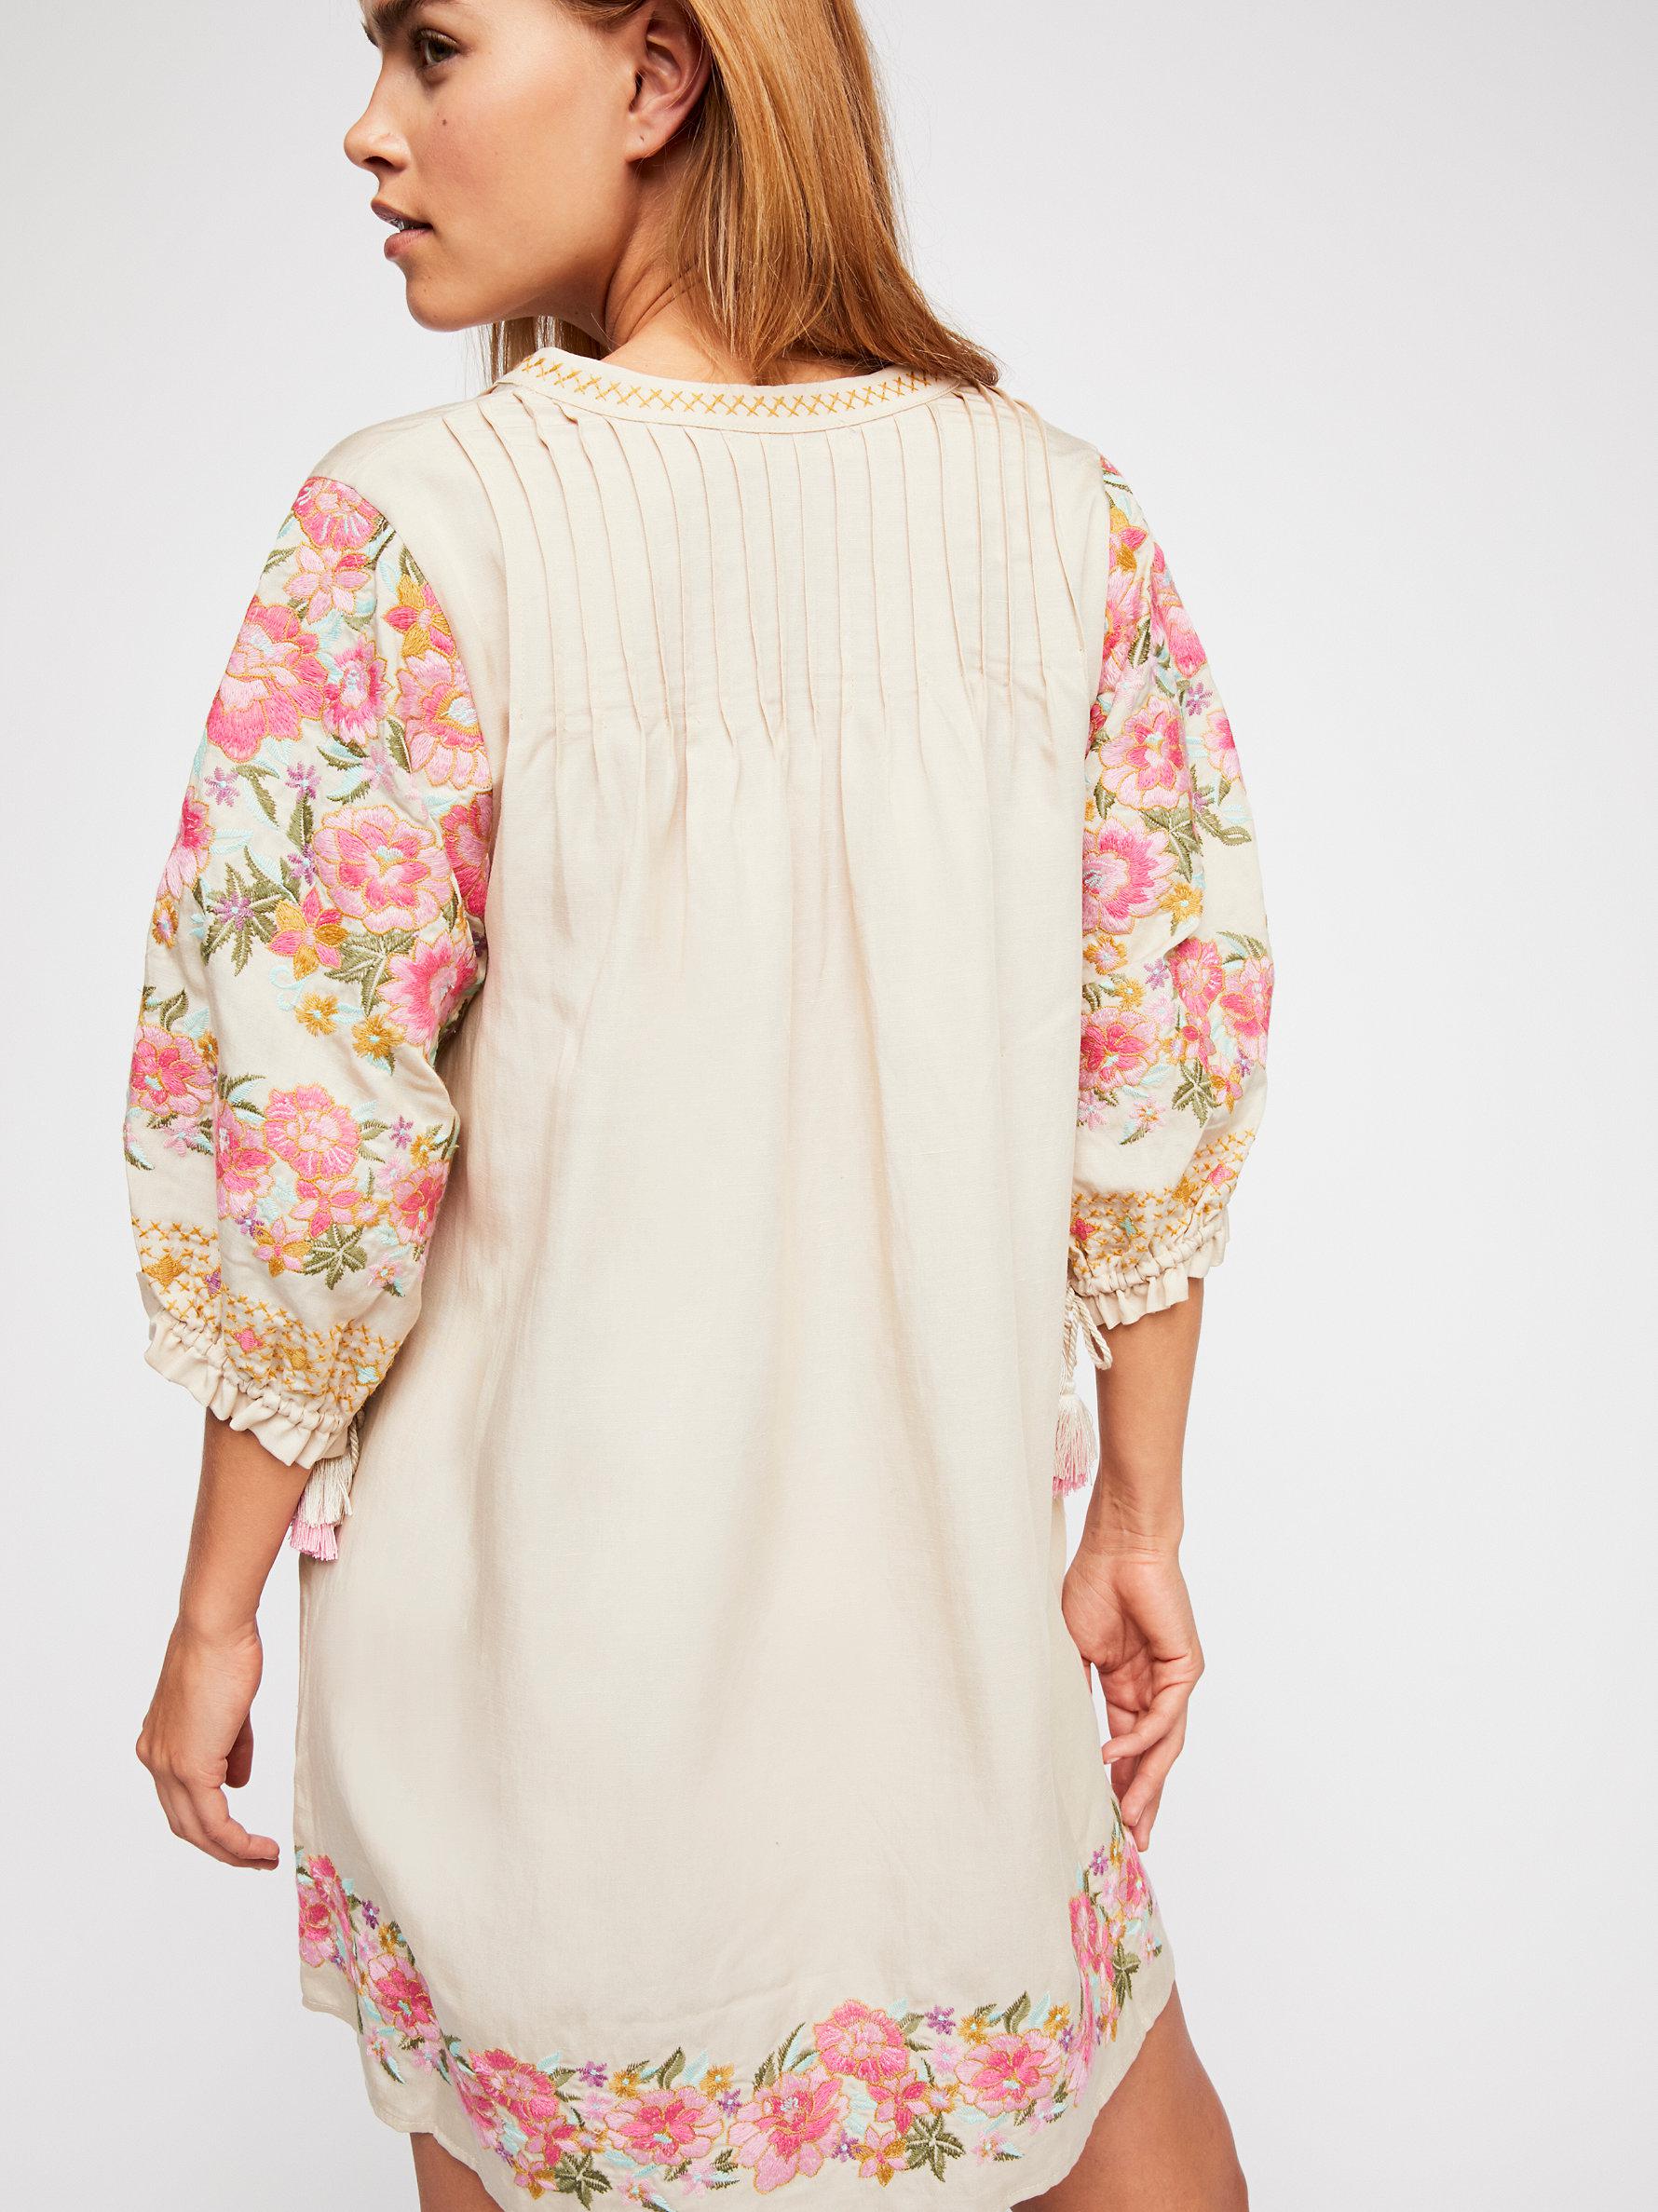 spell and the gypsy cleo tunic dress